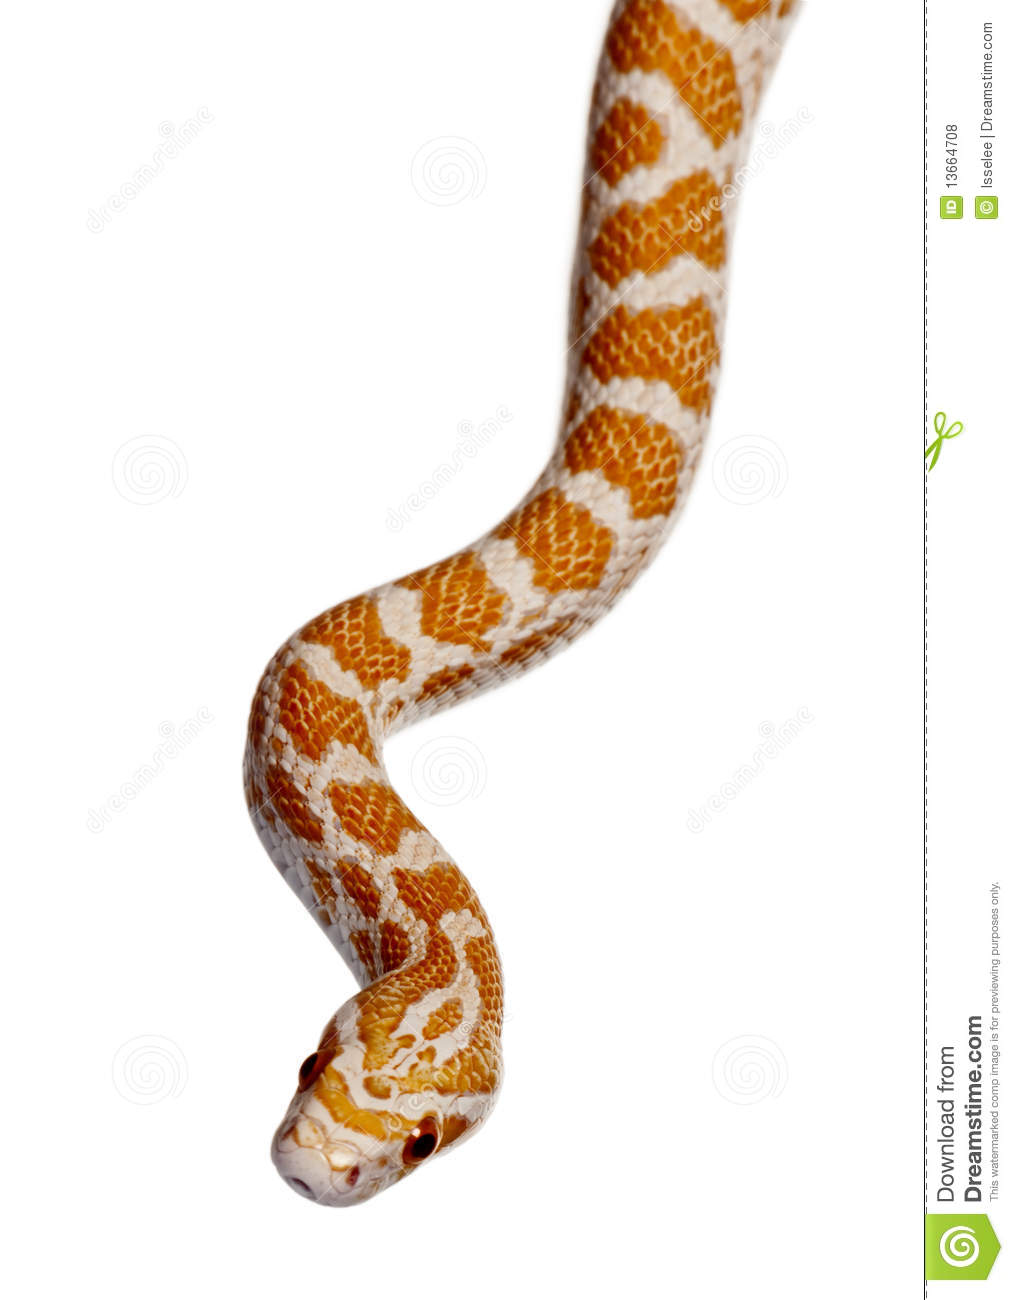 Corn Snake Or Red Rat Snake Slithering Royalty Free Stock Photos